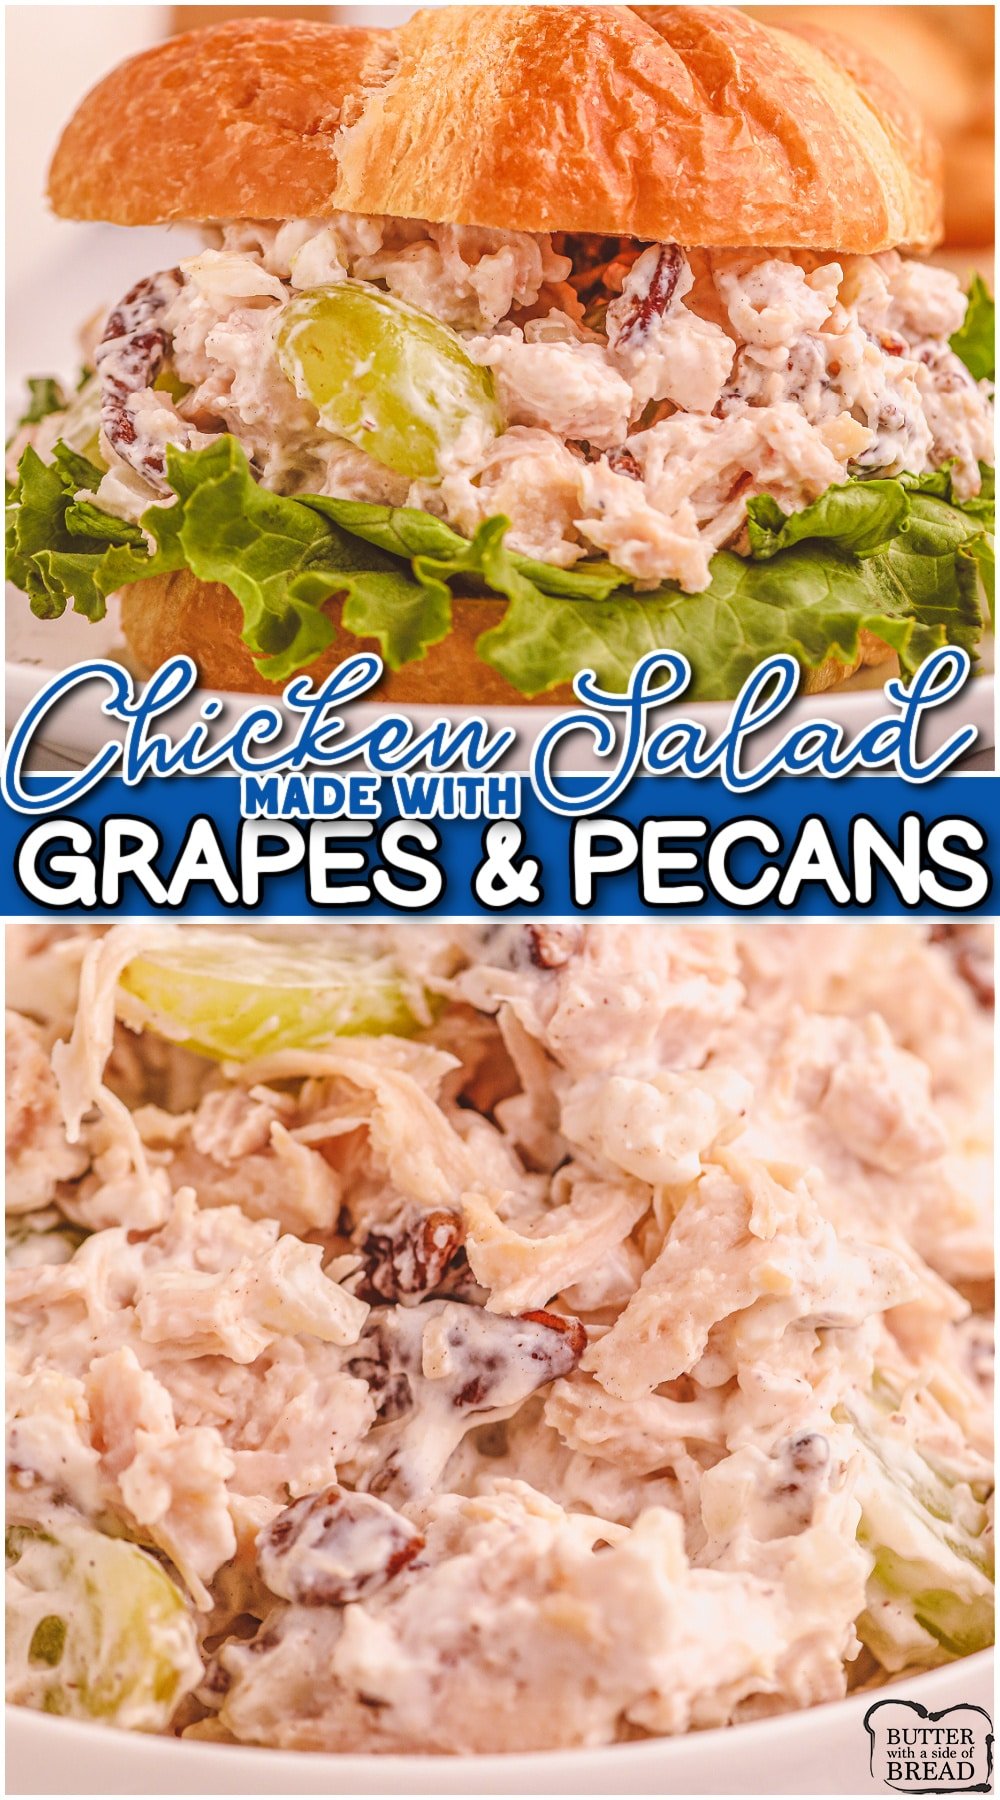 Chicken Salad with Grapes and Pecans is a delicious variation on a classic chicken salad recipe! Packed with hearty chicken, juicy fruit & an amazing dressing, this chicken salad with nuts is perfect!